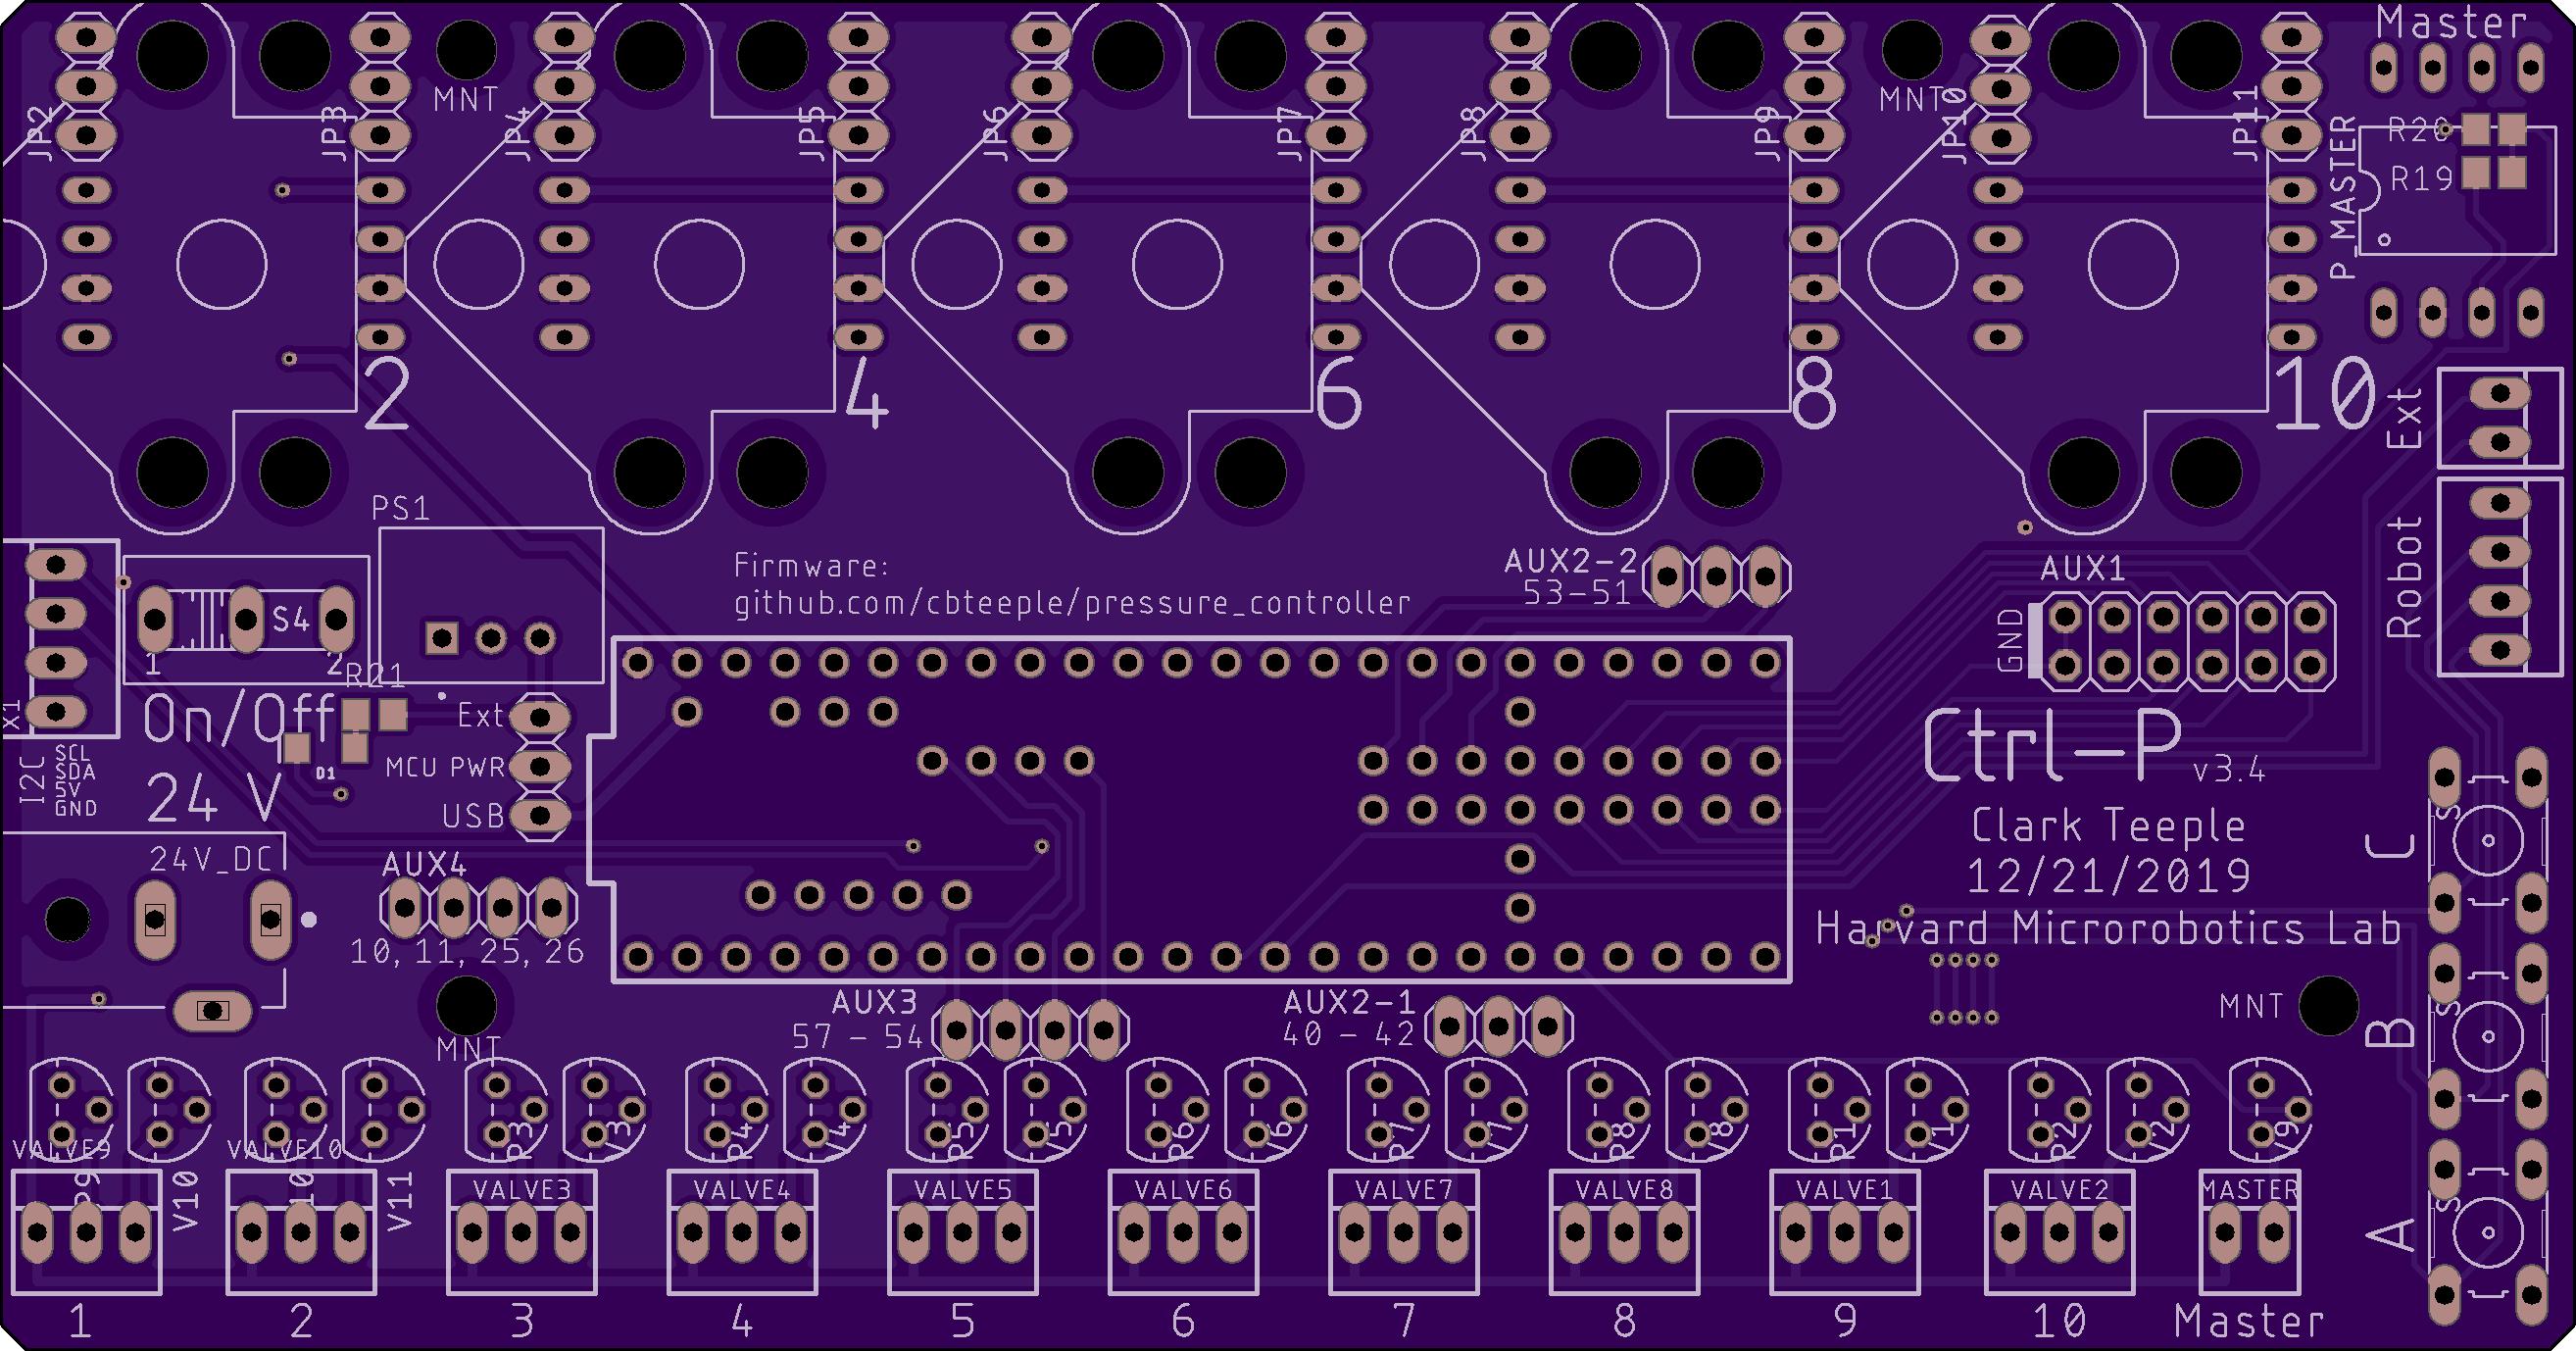 Top view of the PCB